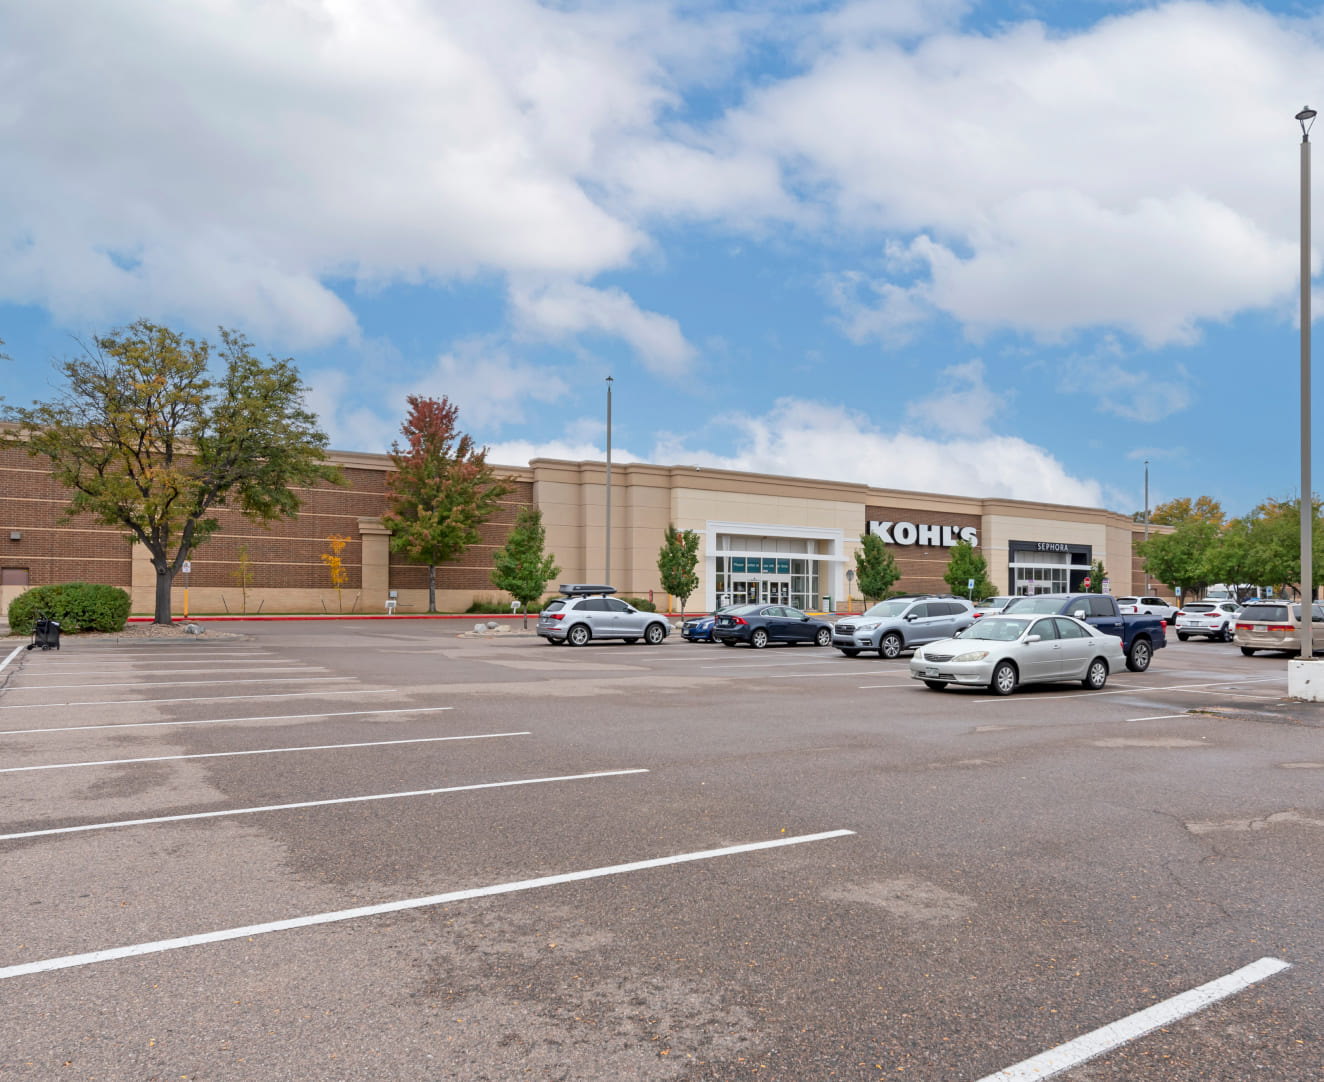 The exterior of the Kohl's at 813-831 Harmony Road in Fort Collins, CO.